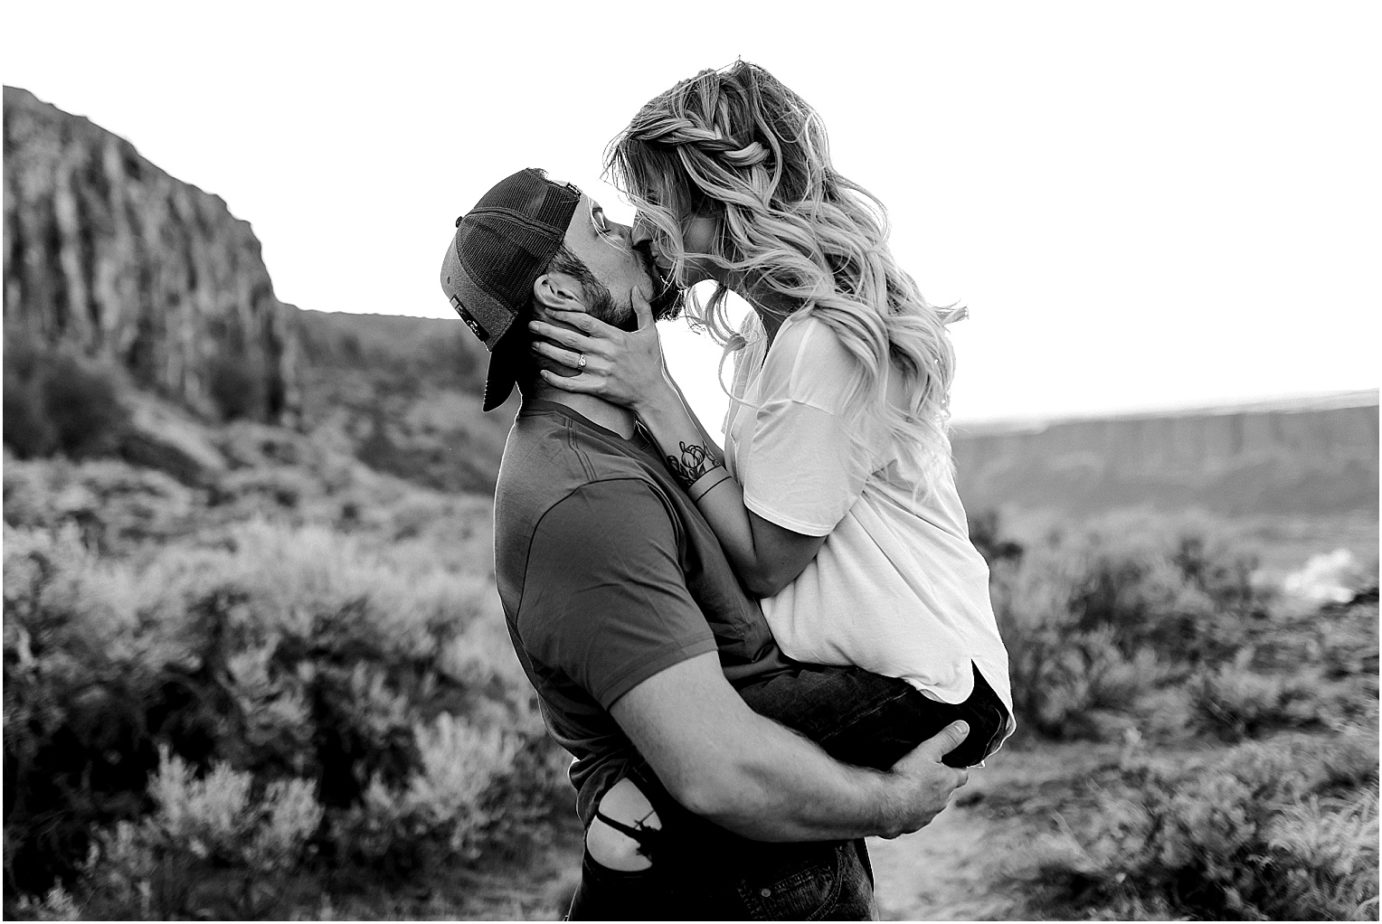 Frenchman Coulee Engagement Session Vantage WA Michael and Carley straddling each other